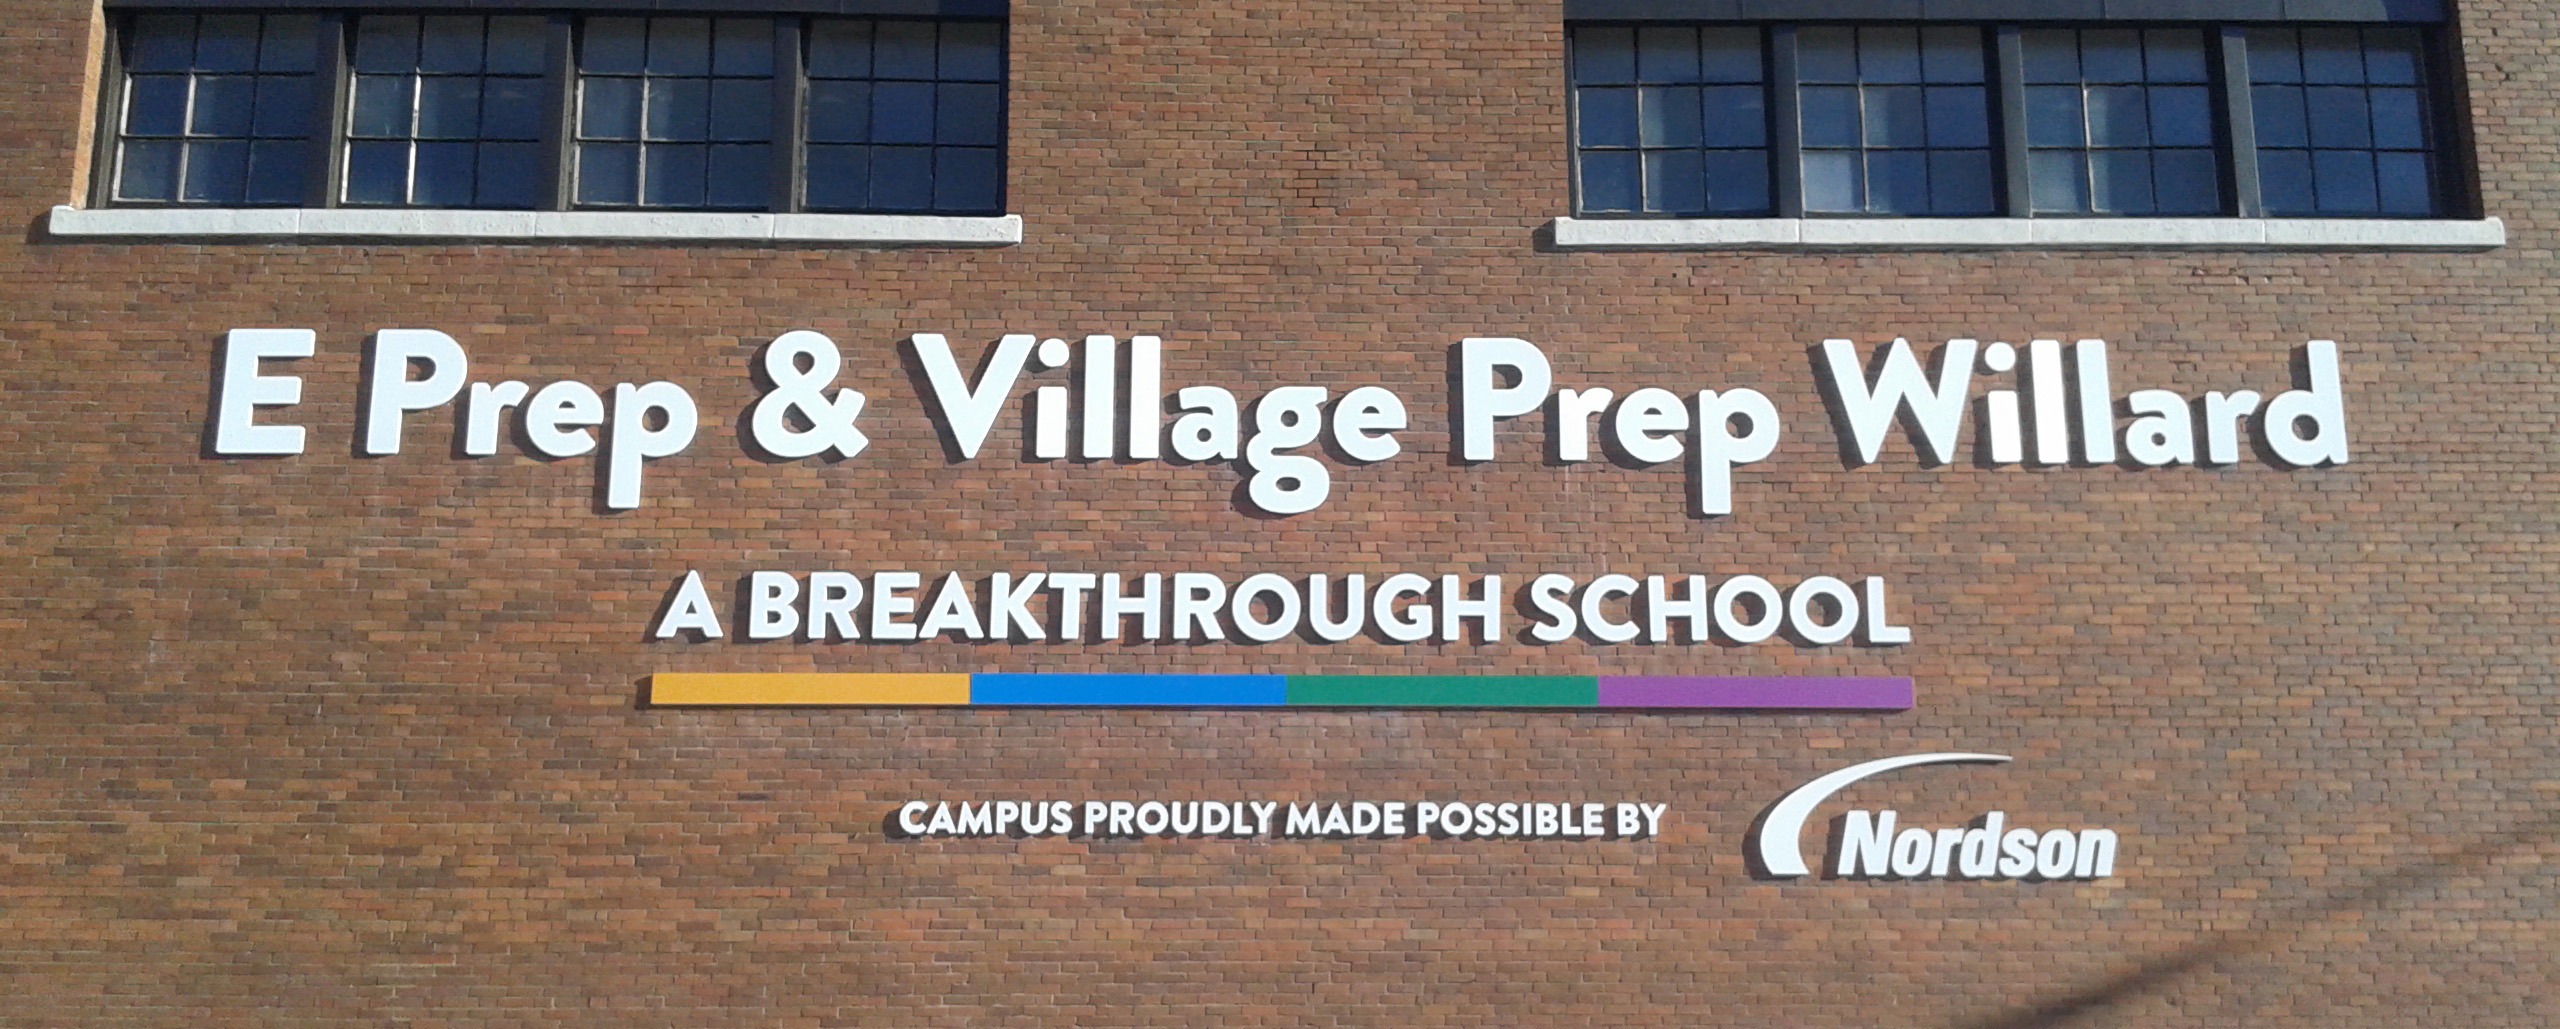 Outdoor school campus sign created by our wide format department and installed on the building by Consolidated Solutions - Portfolio Corporate Signage